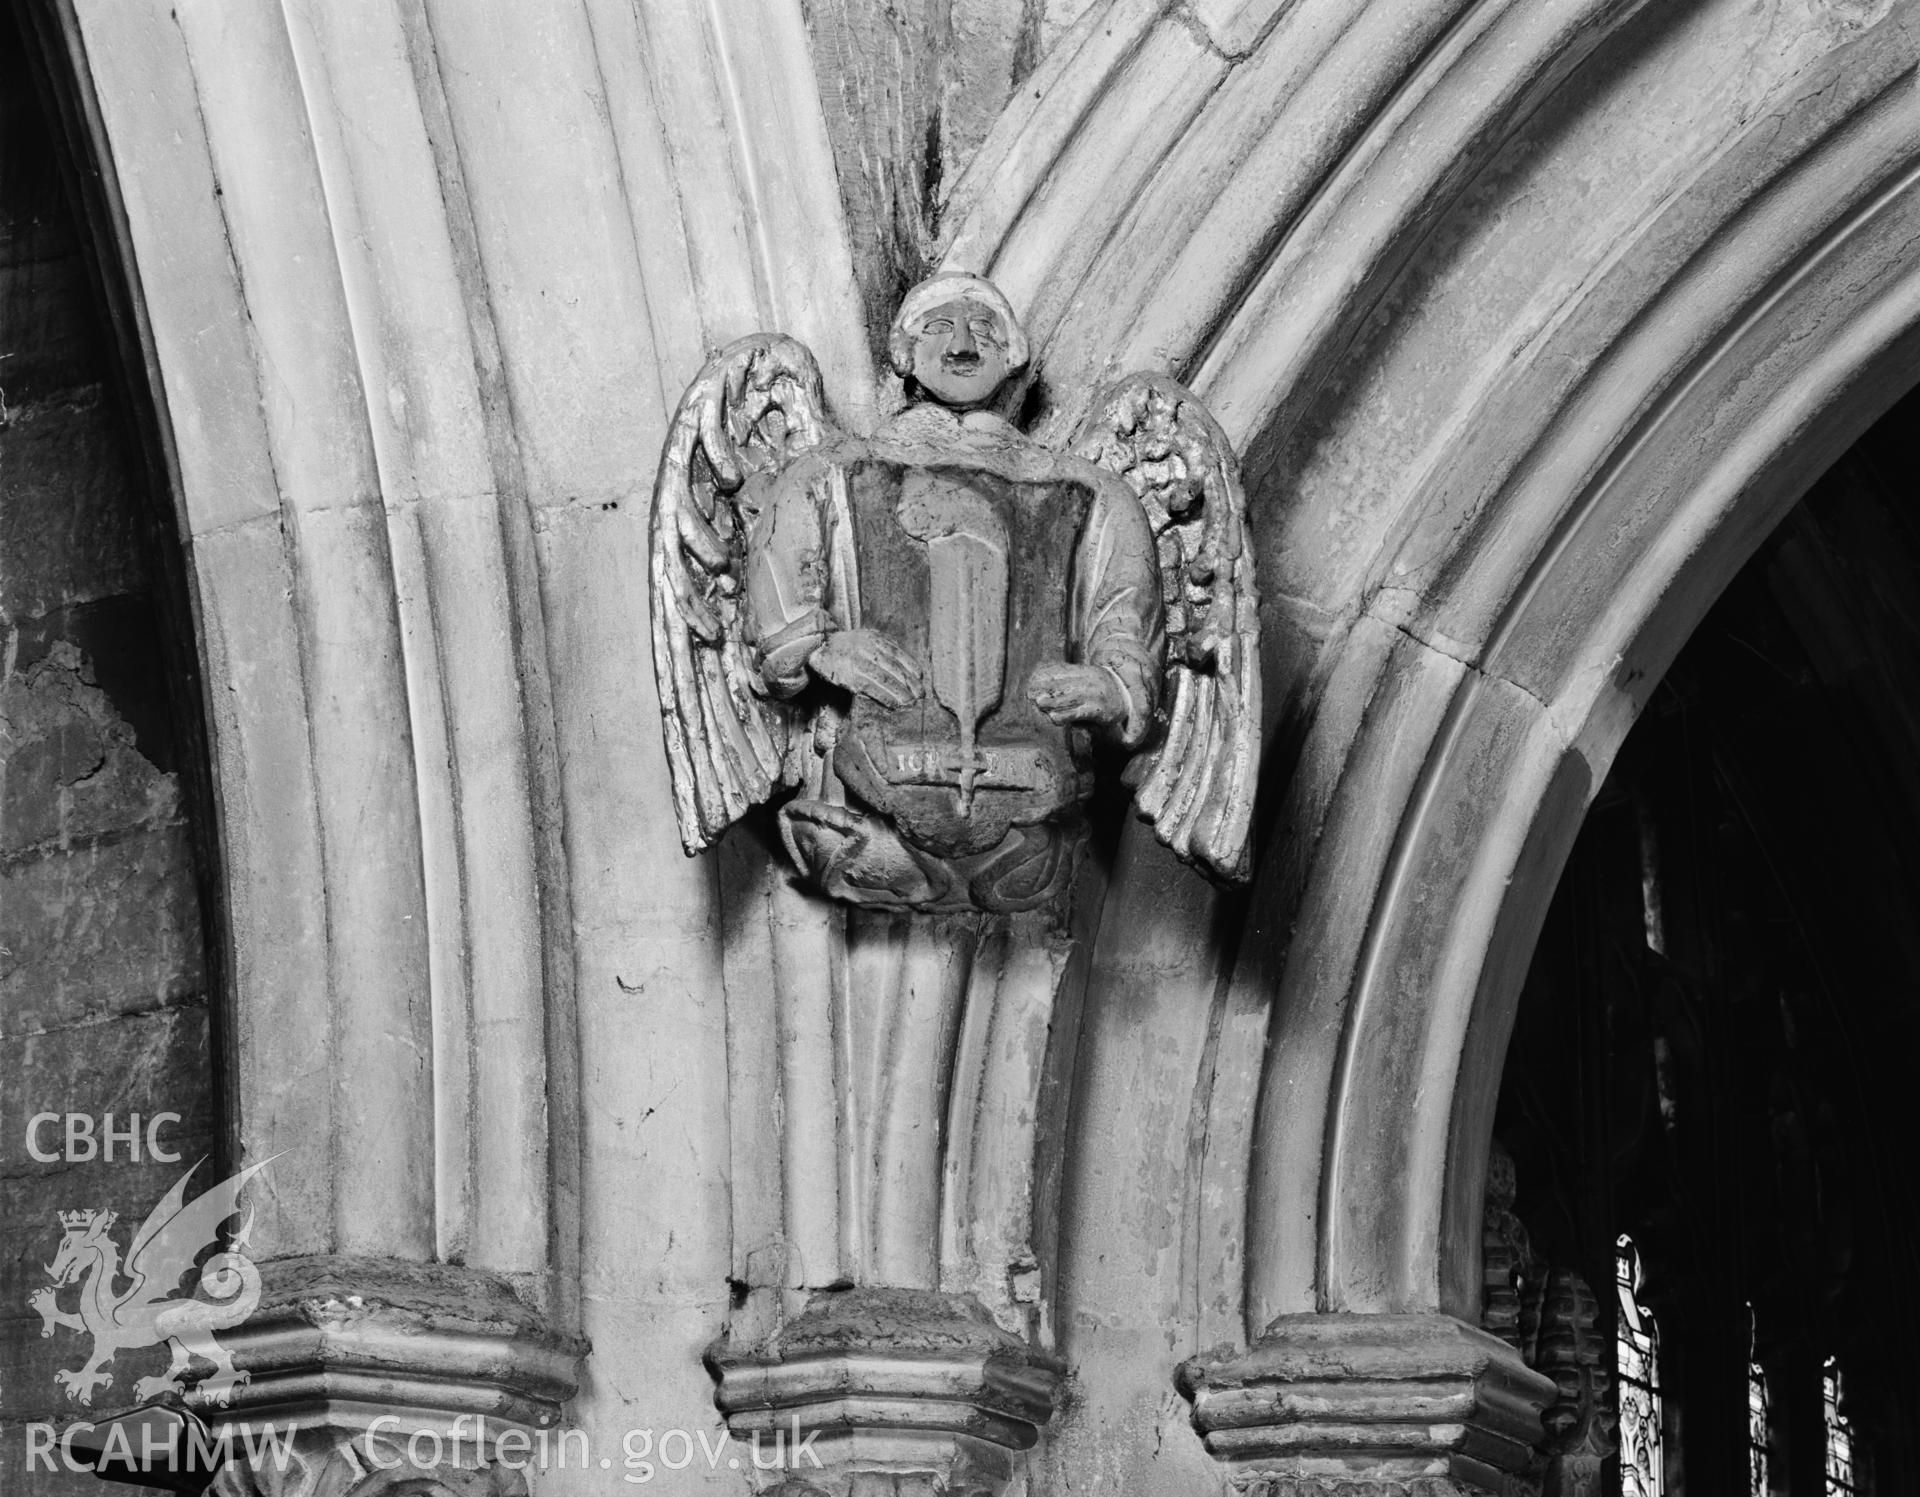 Mold Parish Church; b&w photograph showing heraldic badge in nave arcade, taken by Iain Wright, October 2001.